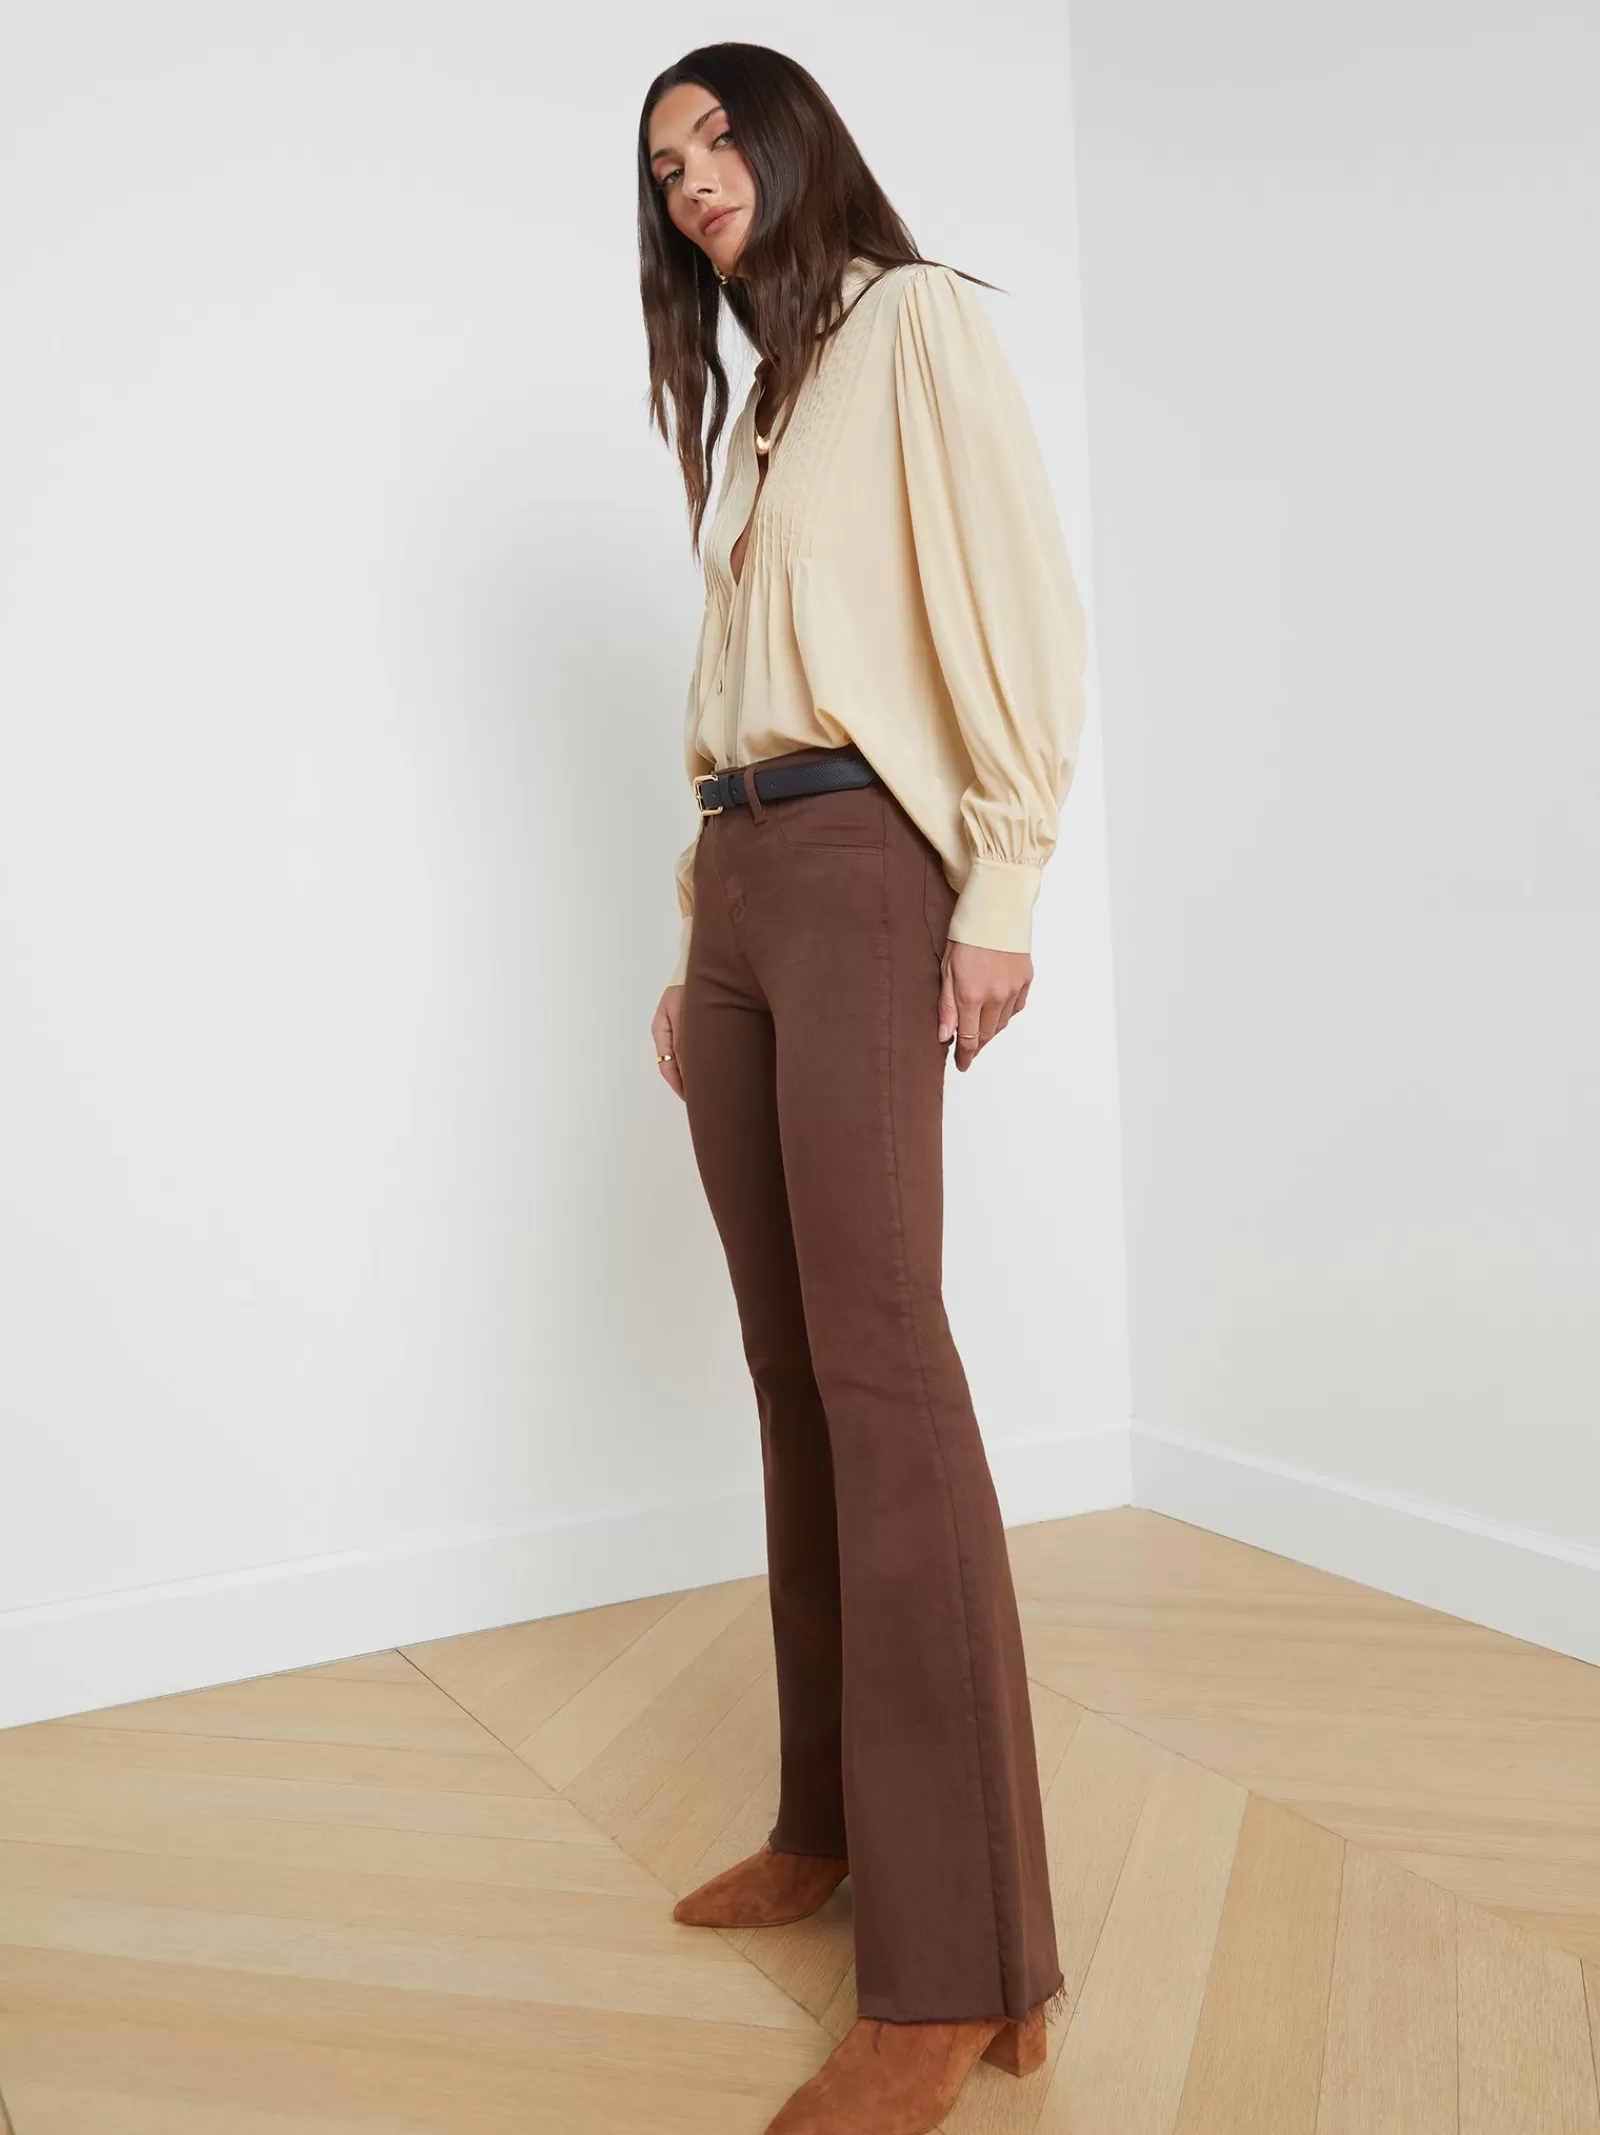 L'AGENCE Sera Jean< Resort Collection | Flare & Bootcut